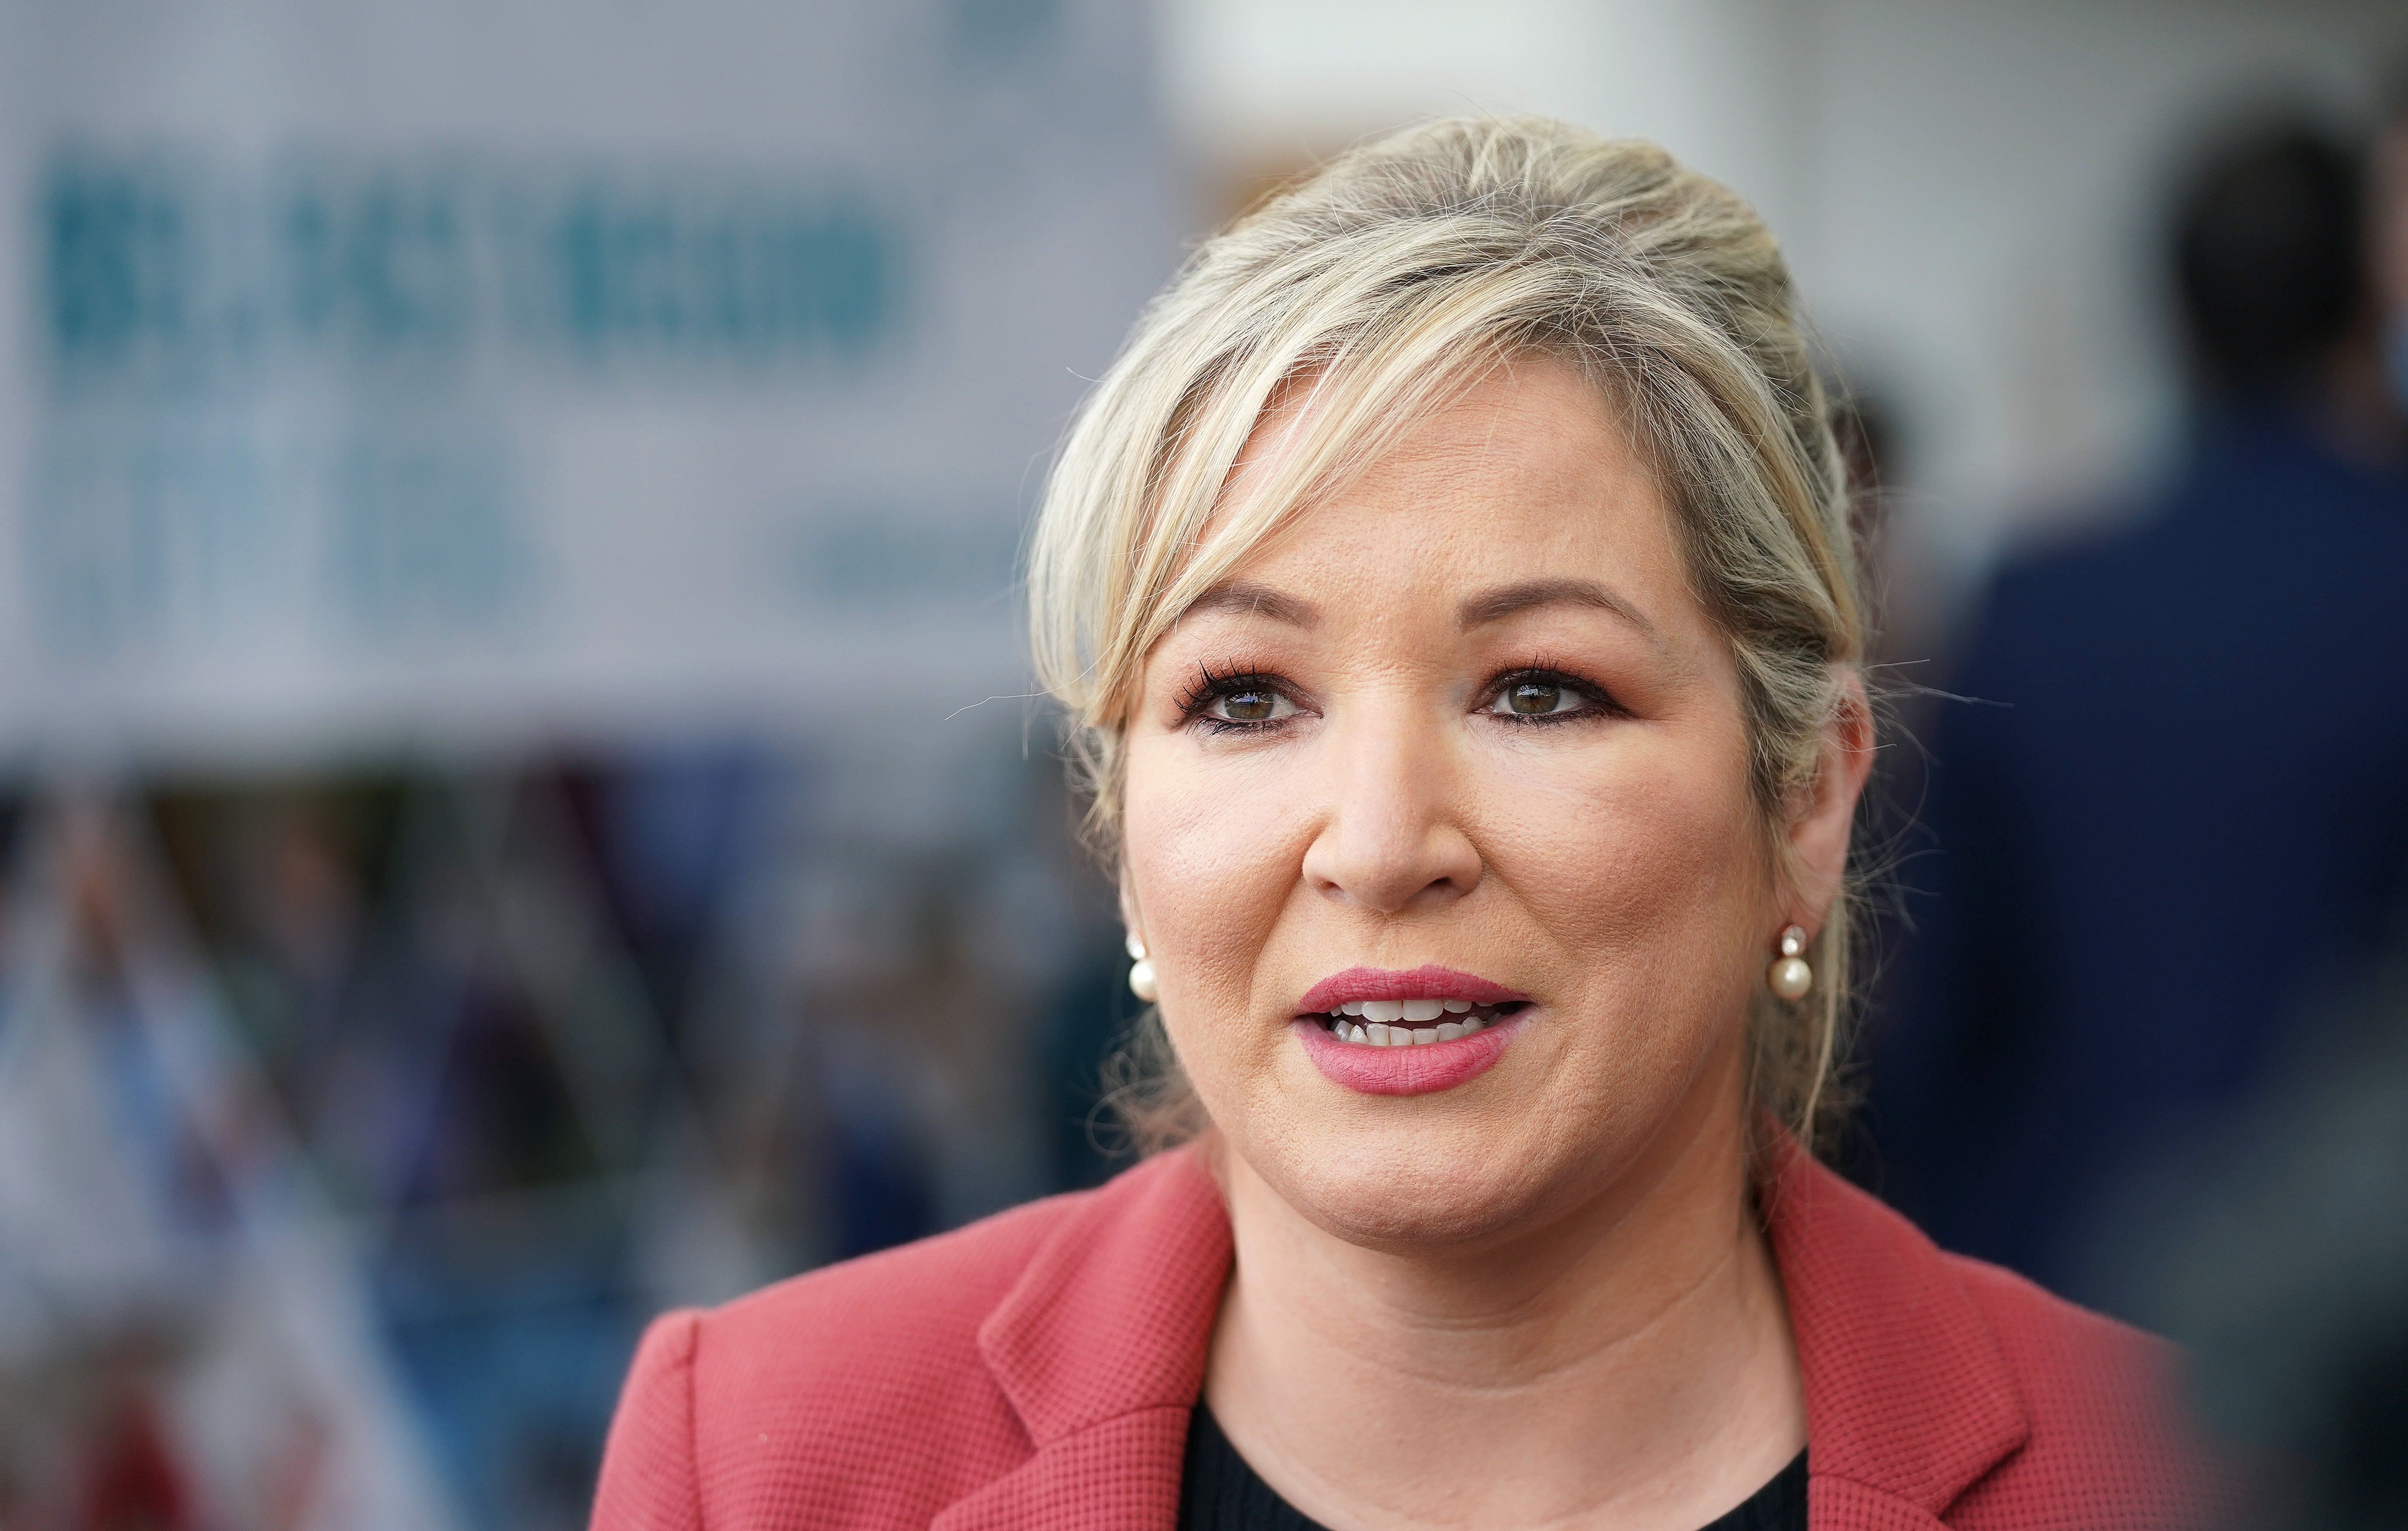 Michelle O’Neill looks well-placed to become First Minister, according to the poll (Brian Lawless/PA)